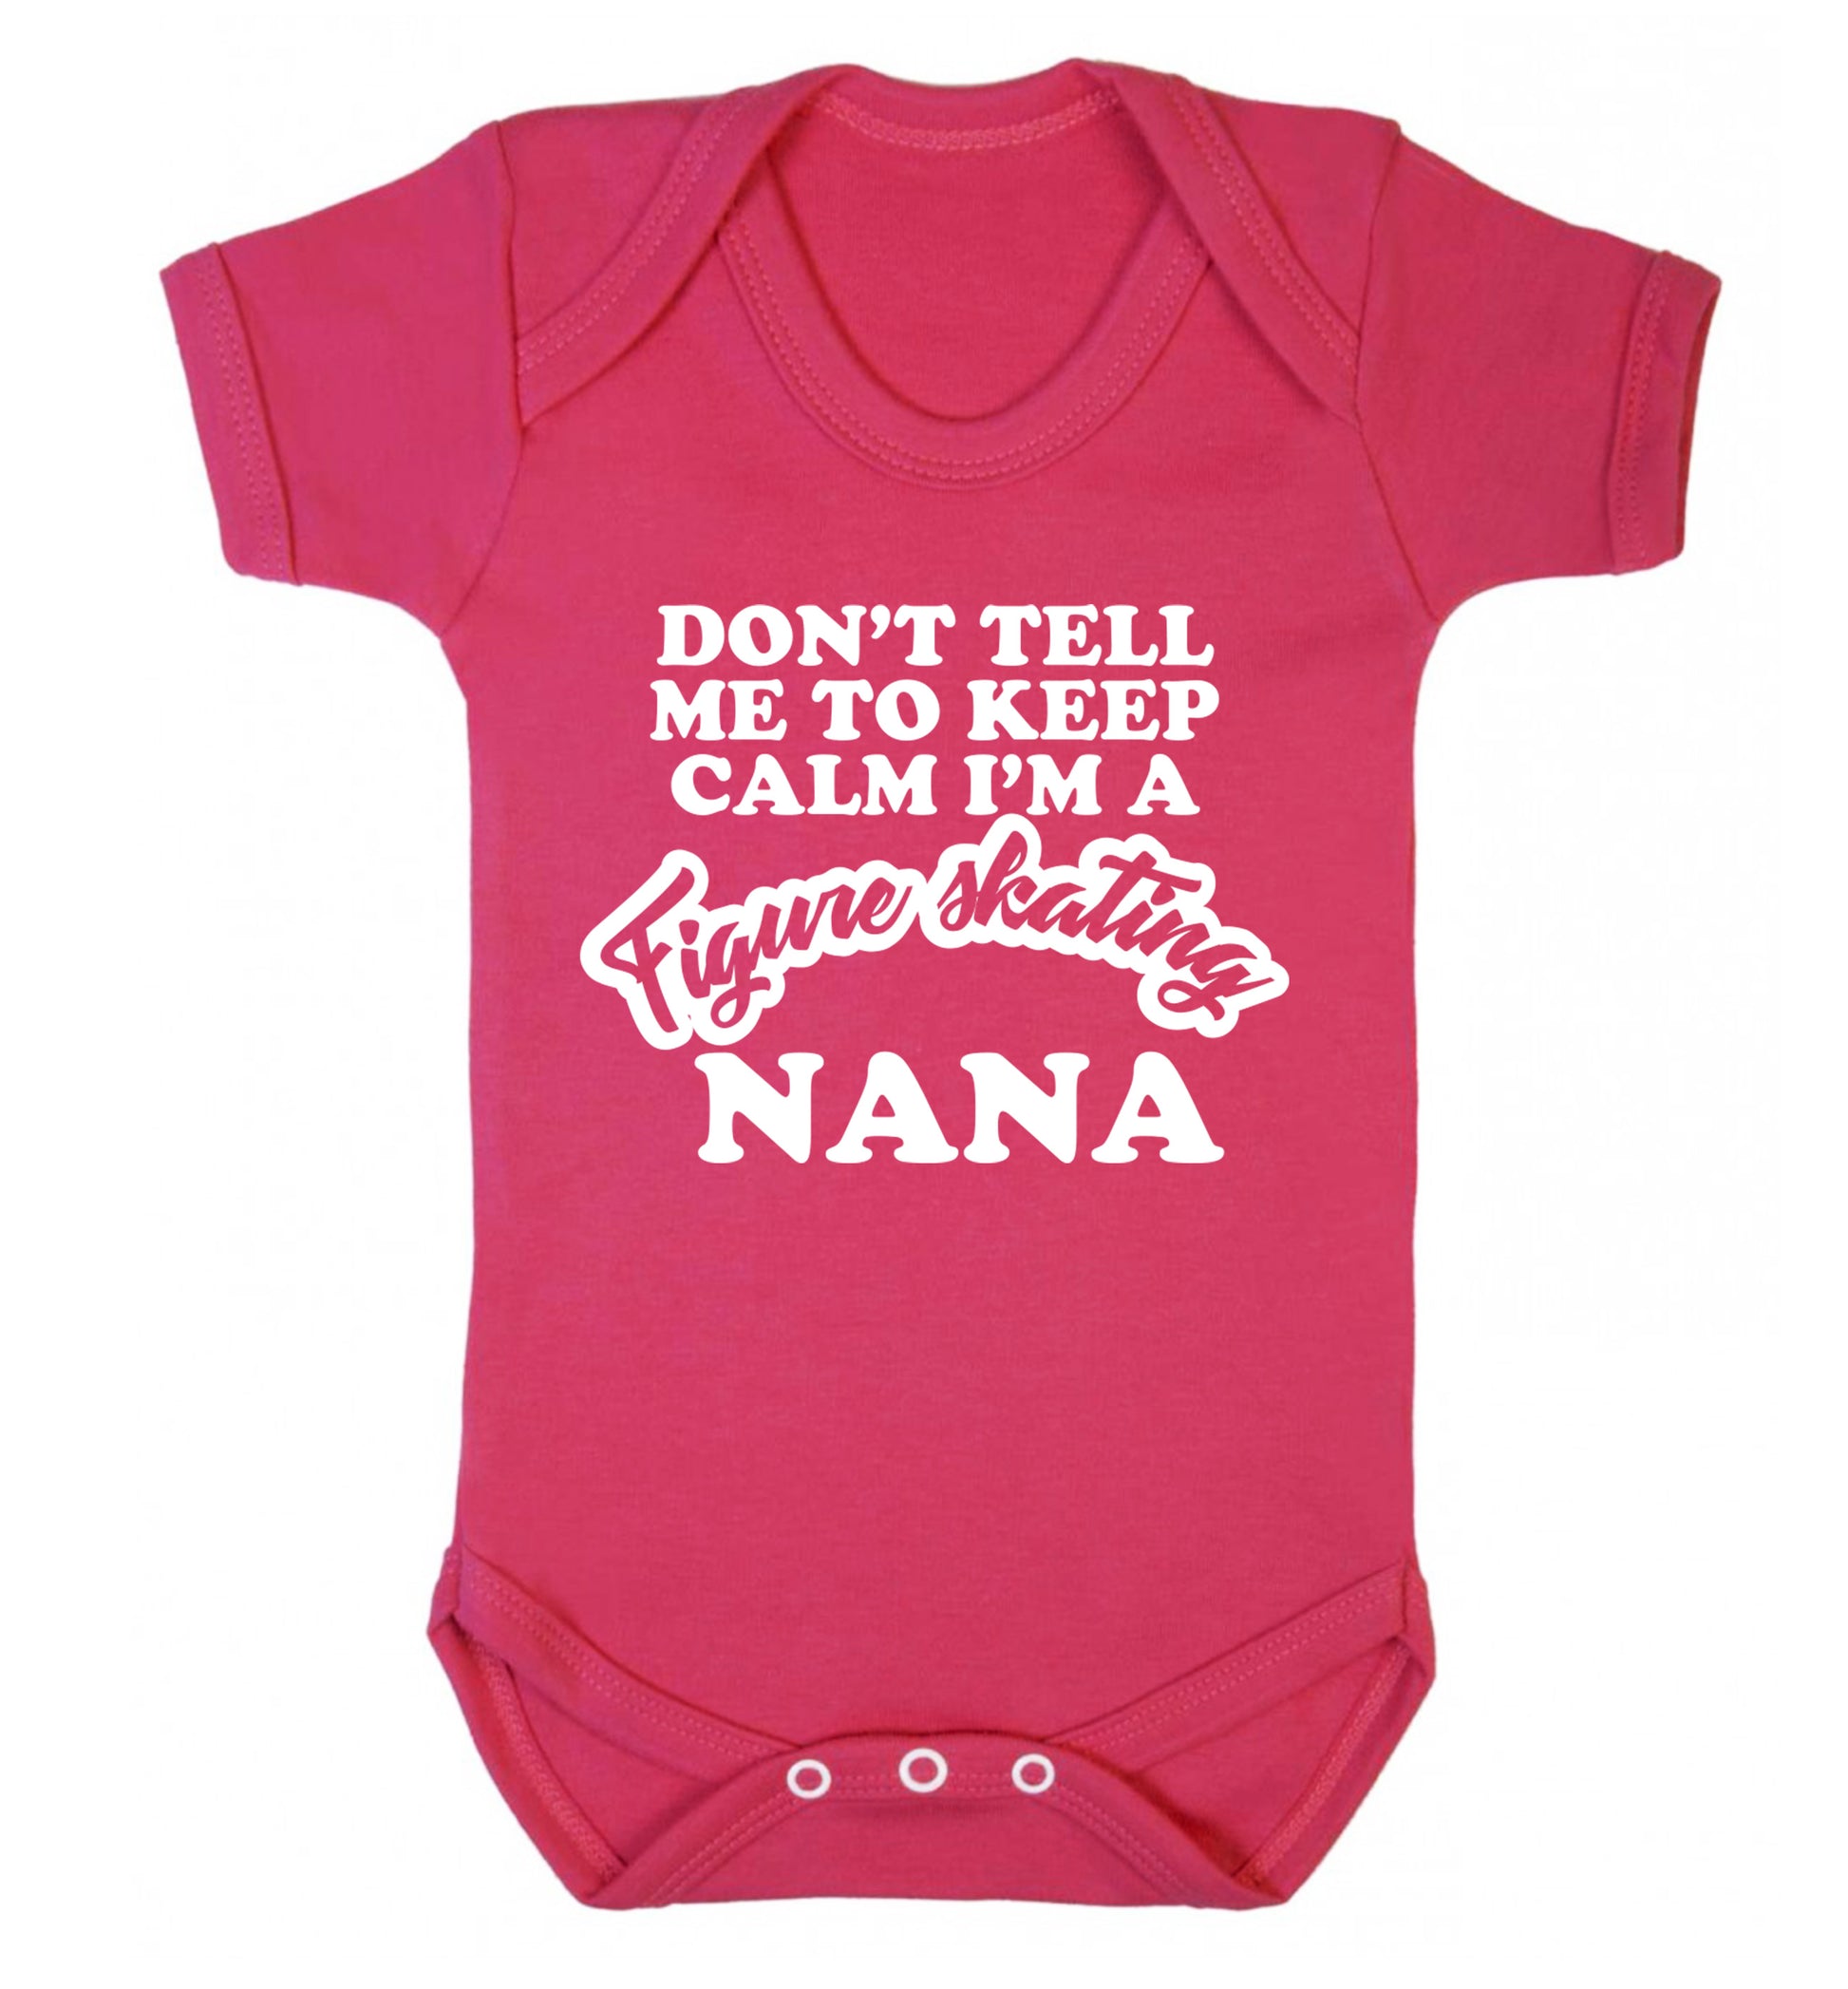 Don't tell me to keep calm I'm a figure skating nana Baby Vest dark pink 18-24 months